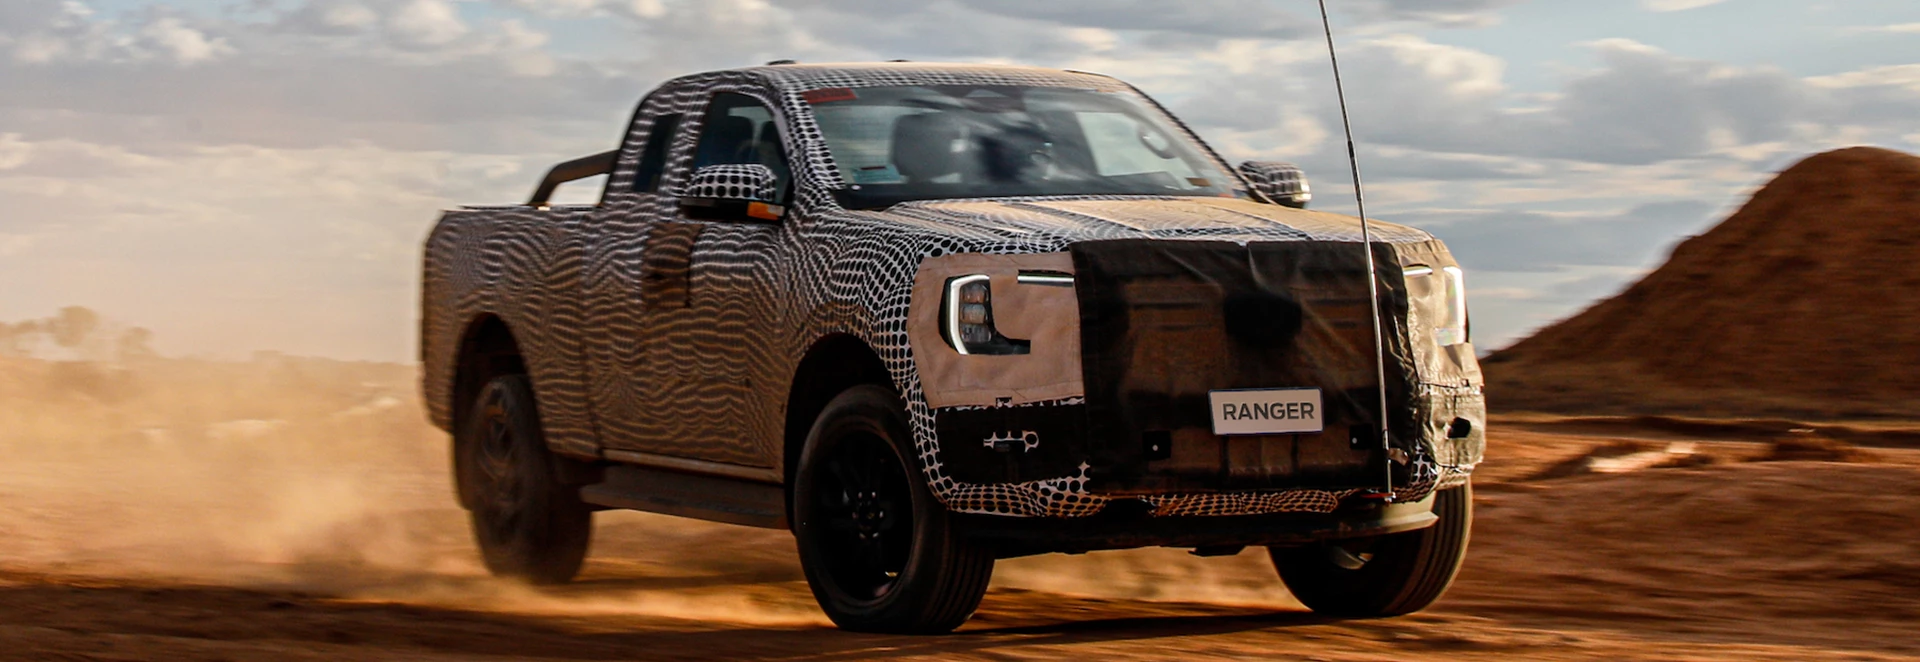 Ford teases new Ranger pick-up ahead of 2022 launch 